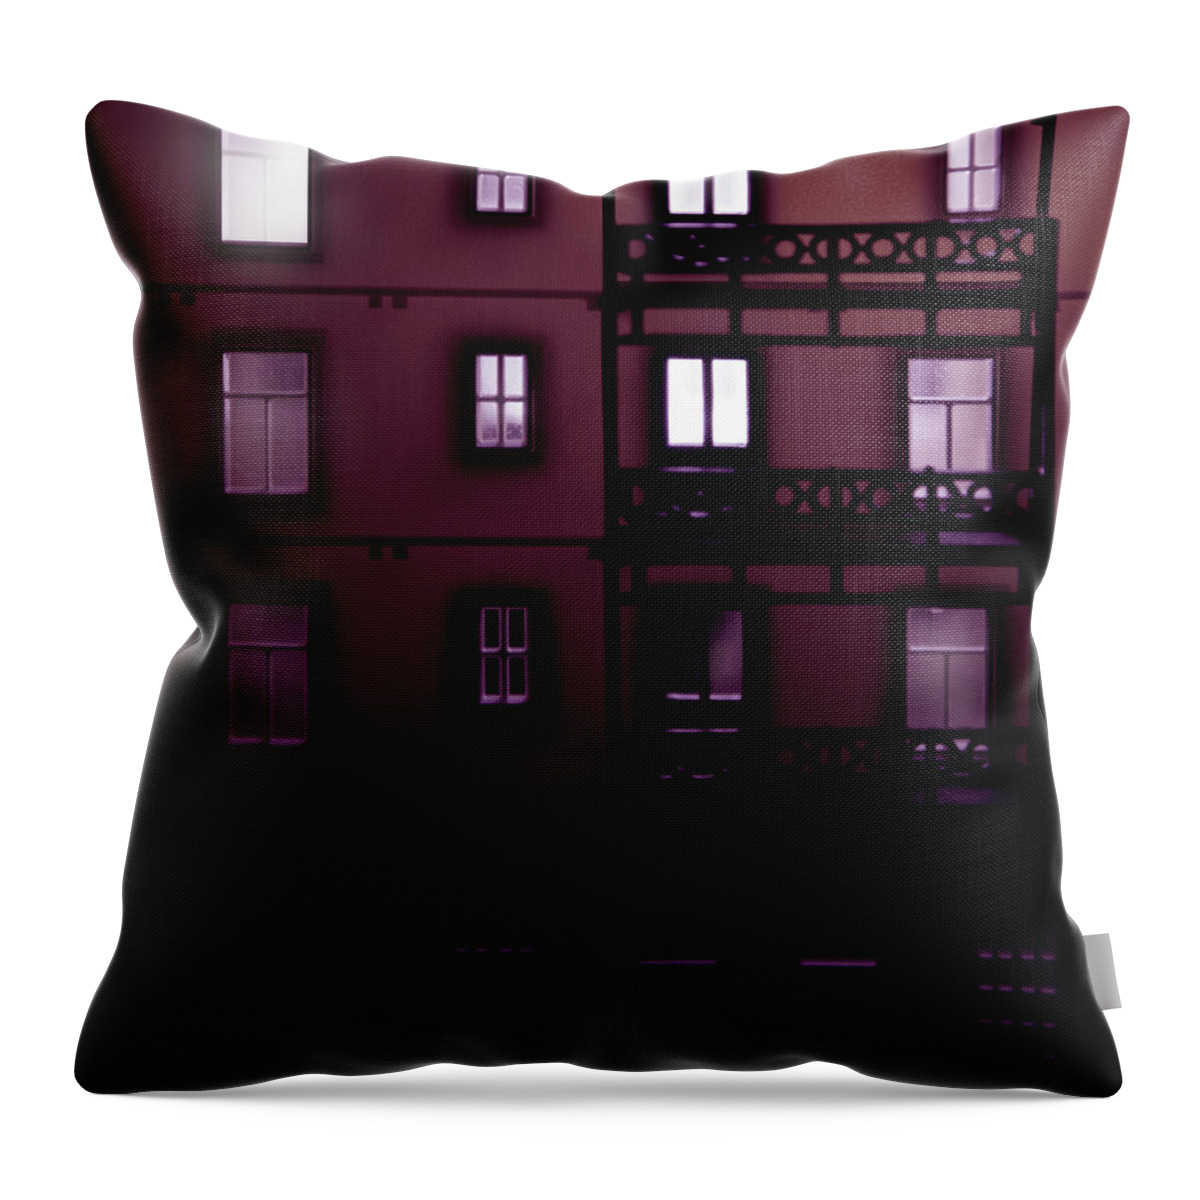 Apartment Throw Pillow featuring the photograph Apartment Building At Night With Lights by Michael Duva